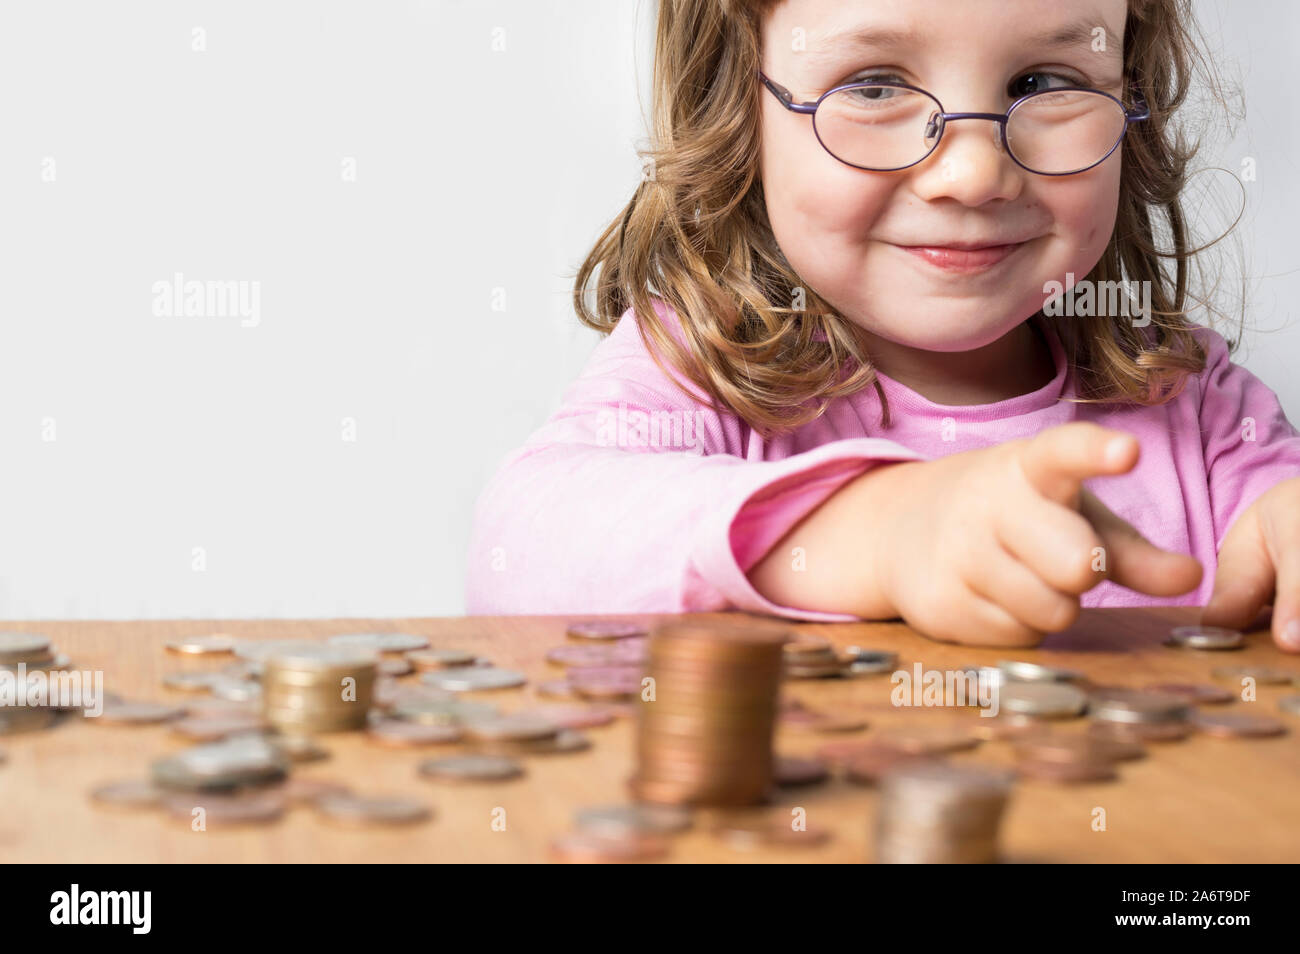 Smiling girl wearing glasses dressed in pink counting coins for savings. Focus on the face. Clean neutral background and copy space on the left. Stock Photo